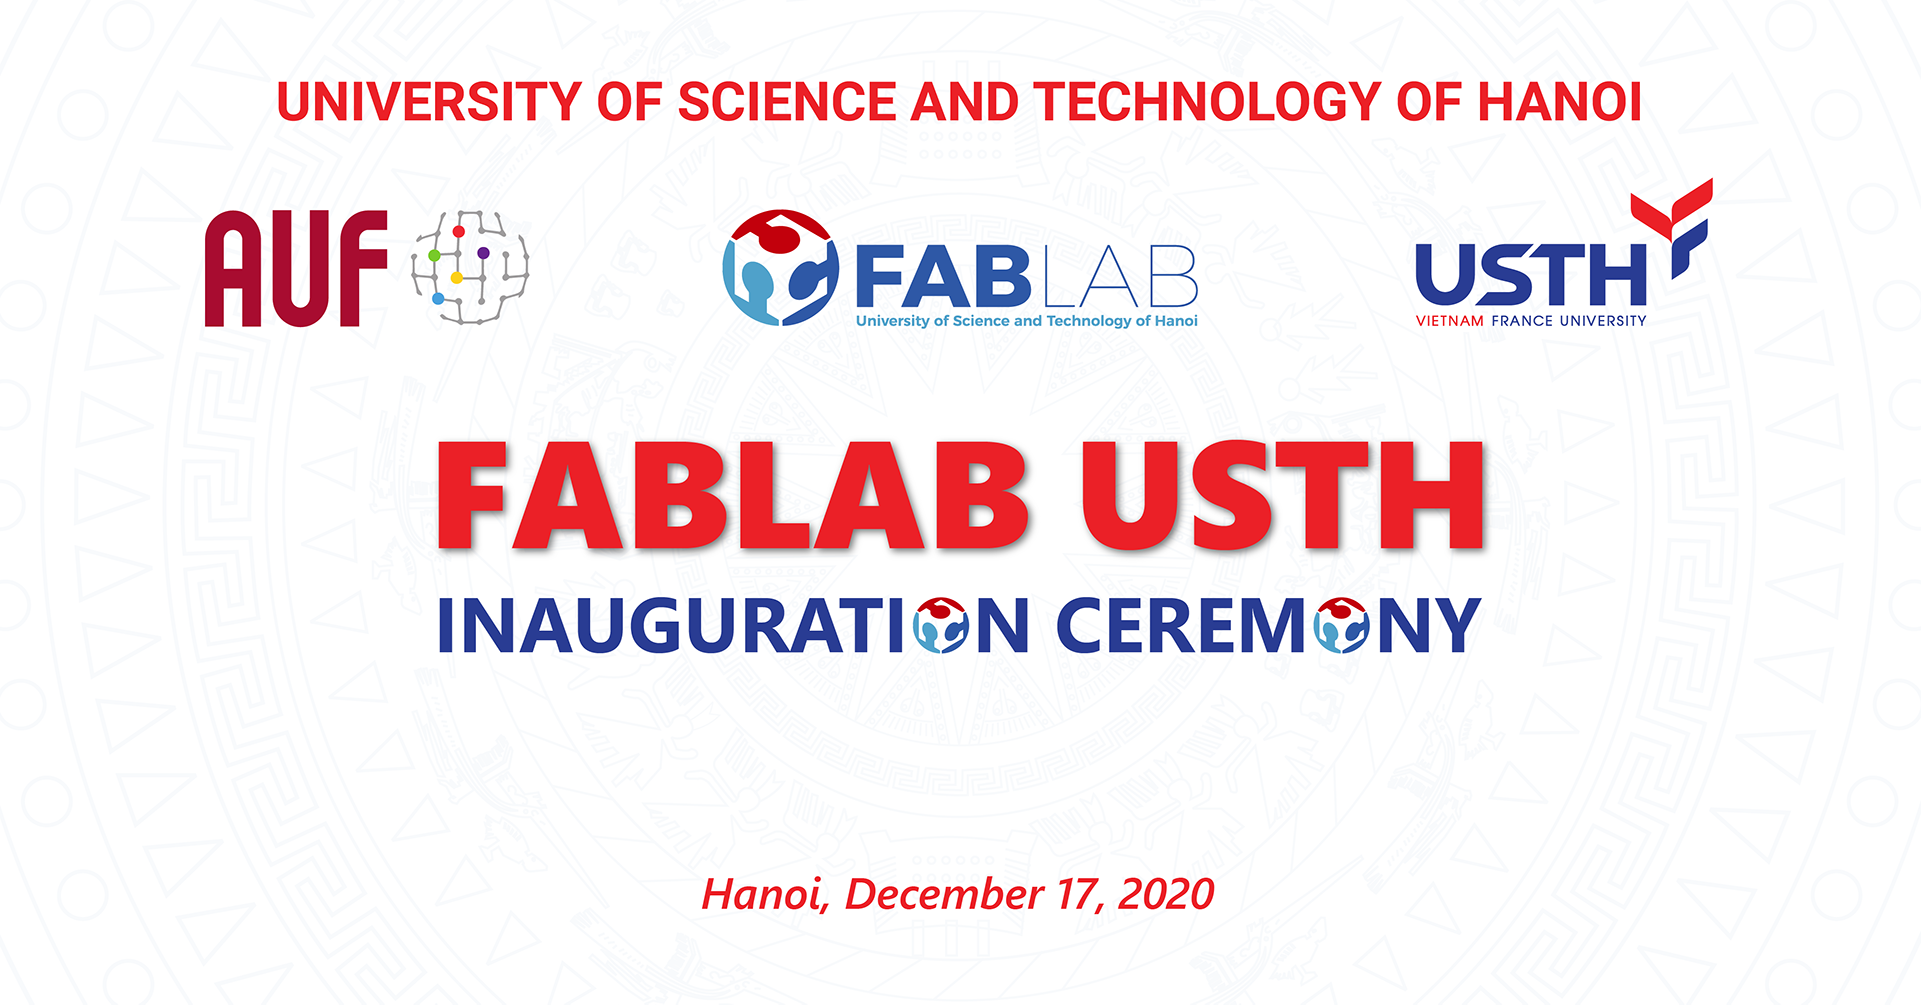 The-Inauguration-Ceremony-of-FabLab-USTH-an-open-creative-space-for-students